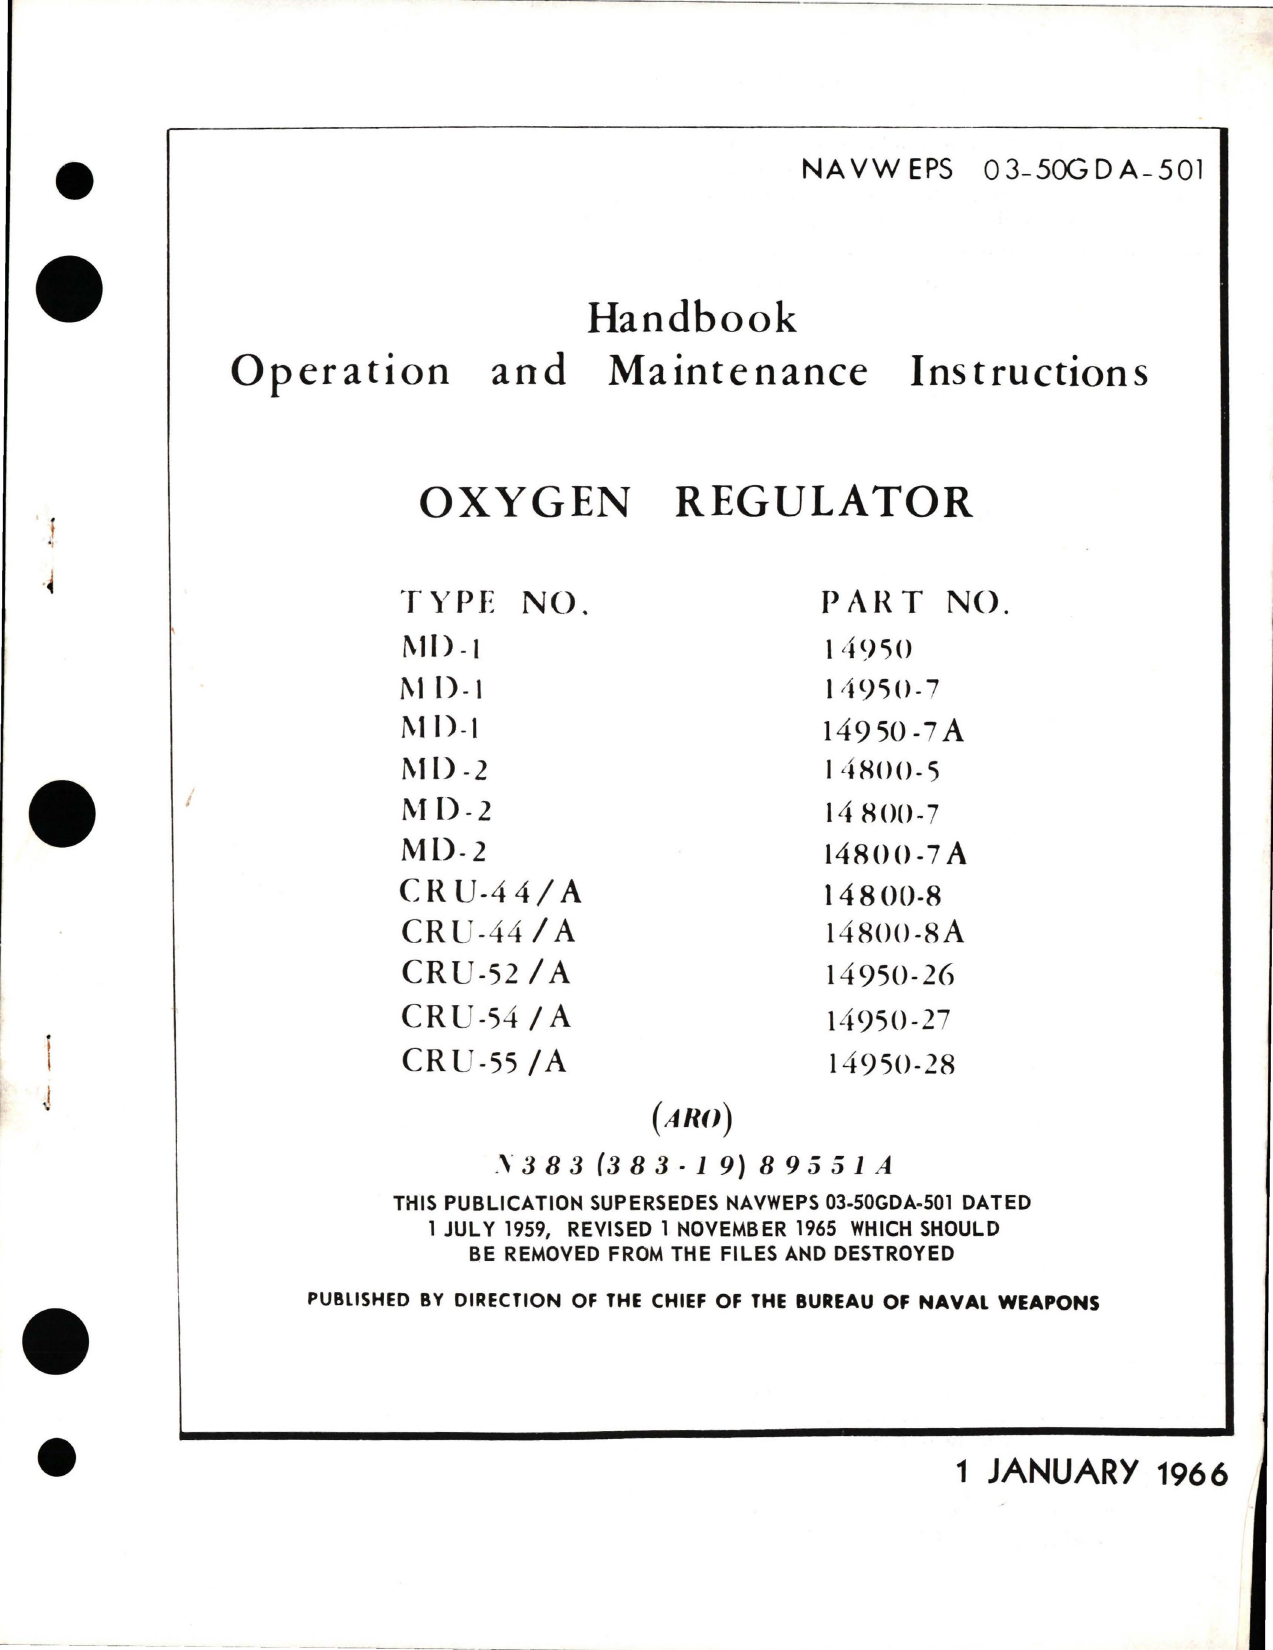 Sample page 1 from AirCorps Library document: Operation and Maintenance Instructions for Oxygen Regulator 